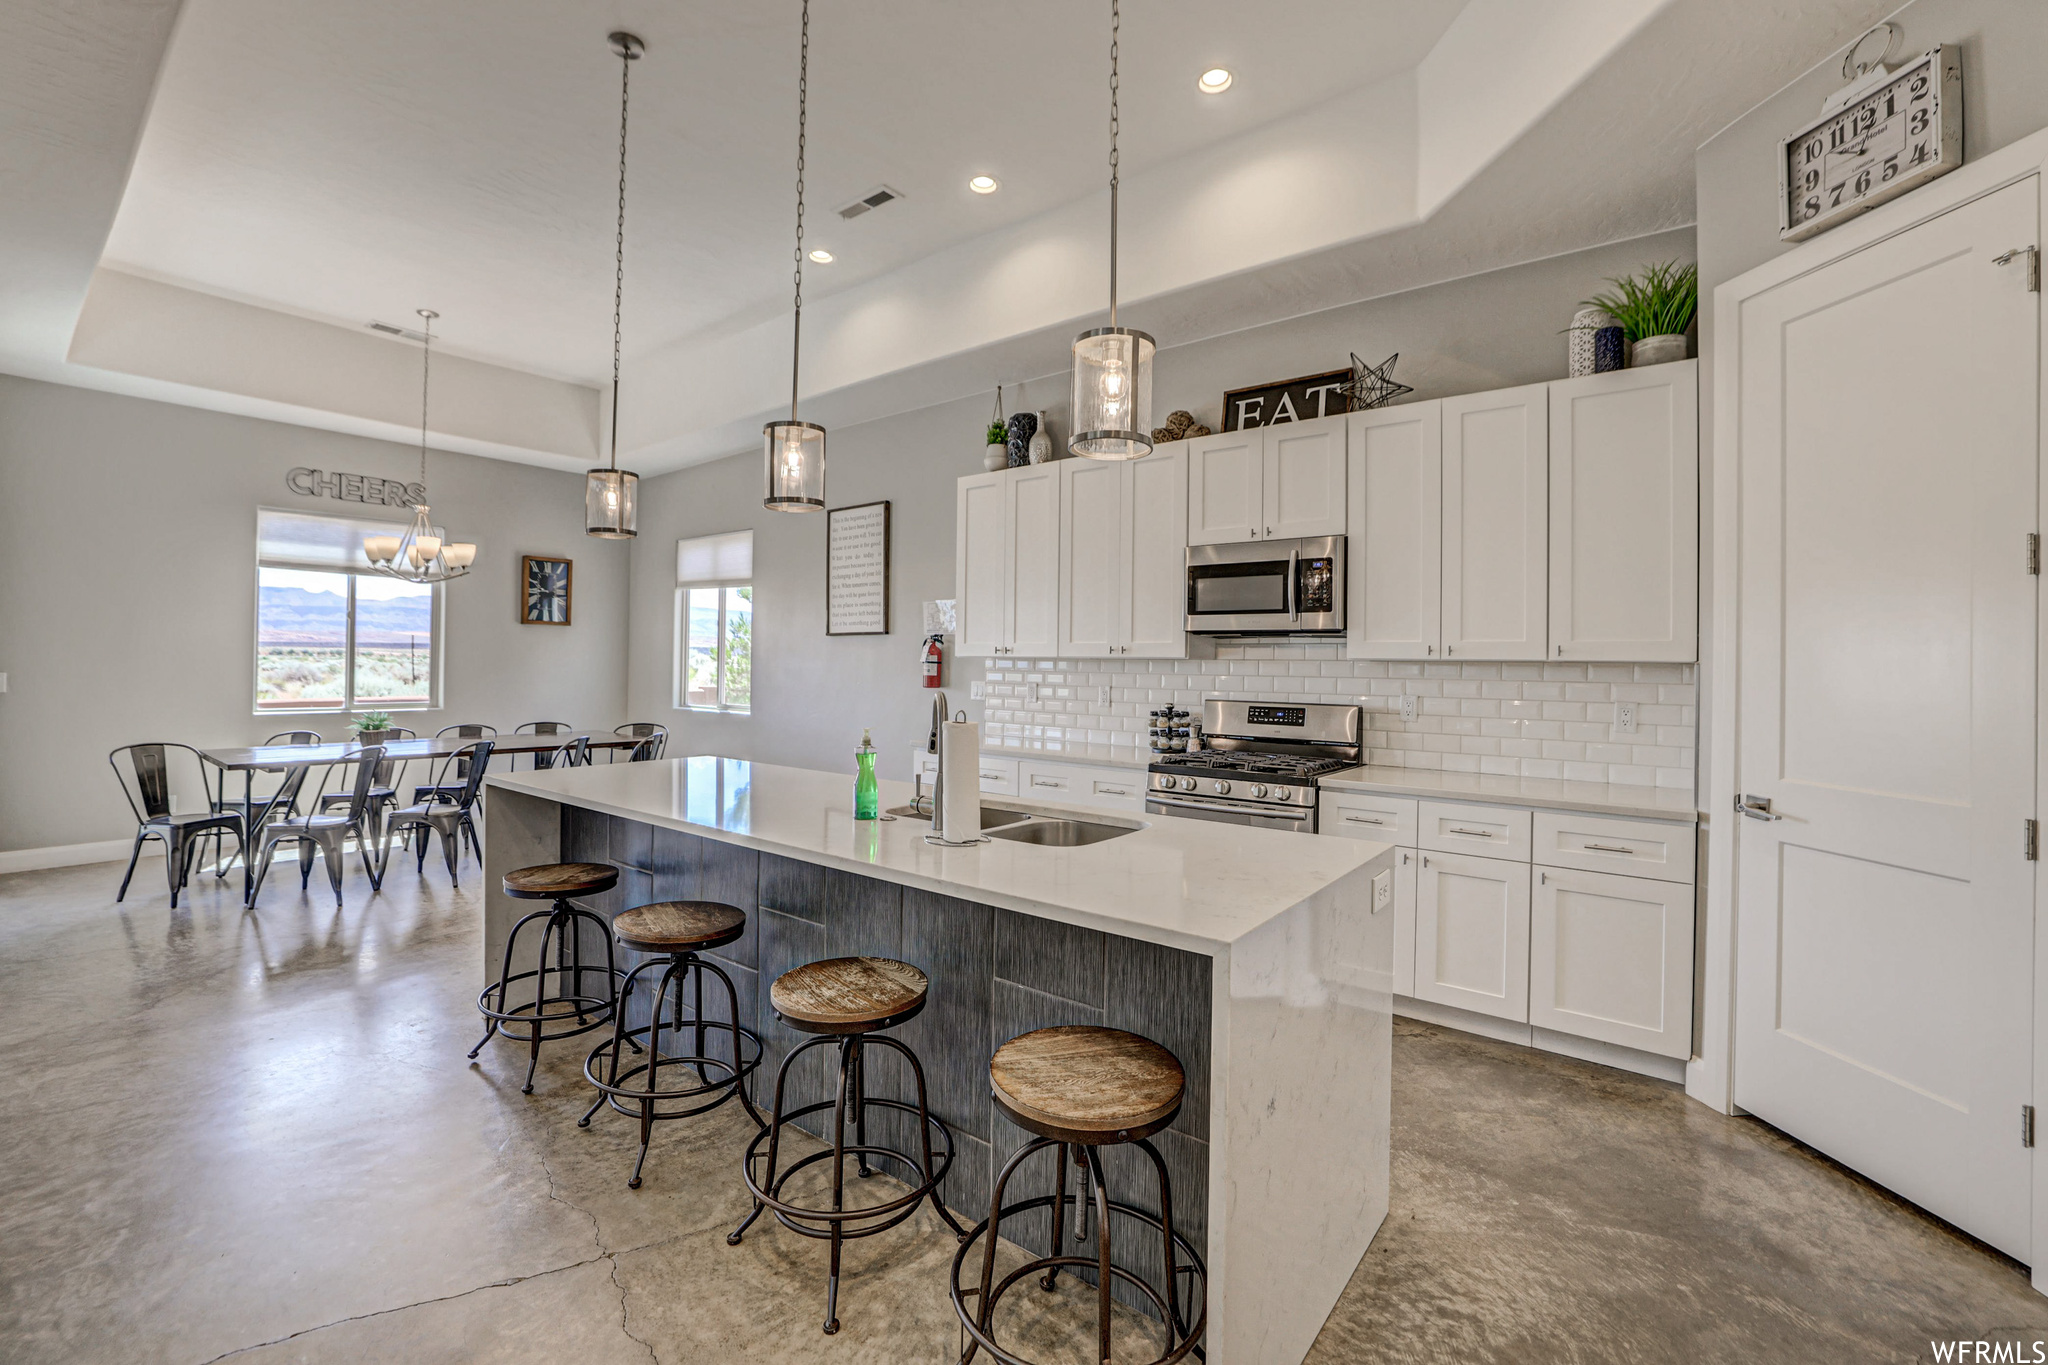 Kitchen featuring a kitchen bar, plenty of natural light, microwave, gas range oven, light countertops, white cabinetry, light tile flooring, and pendant lighting